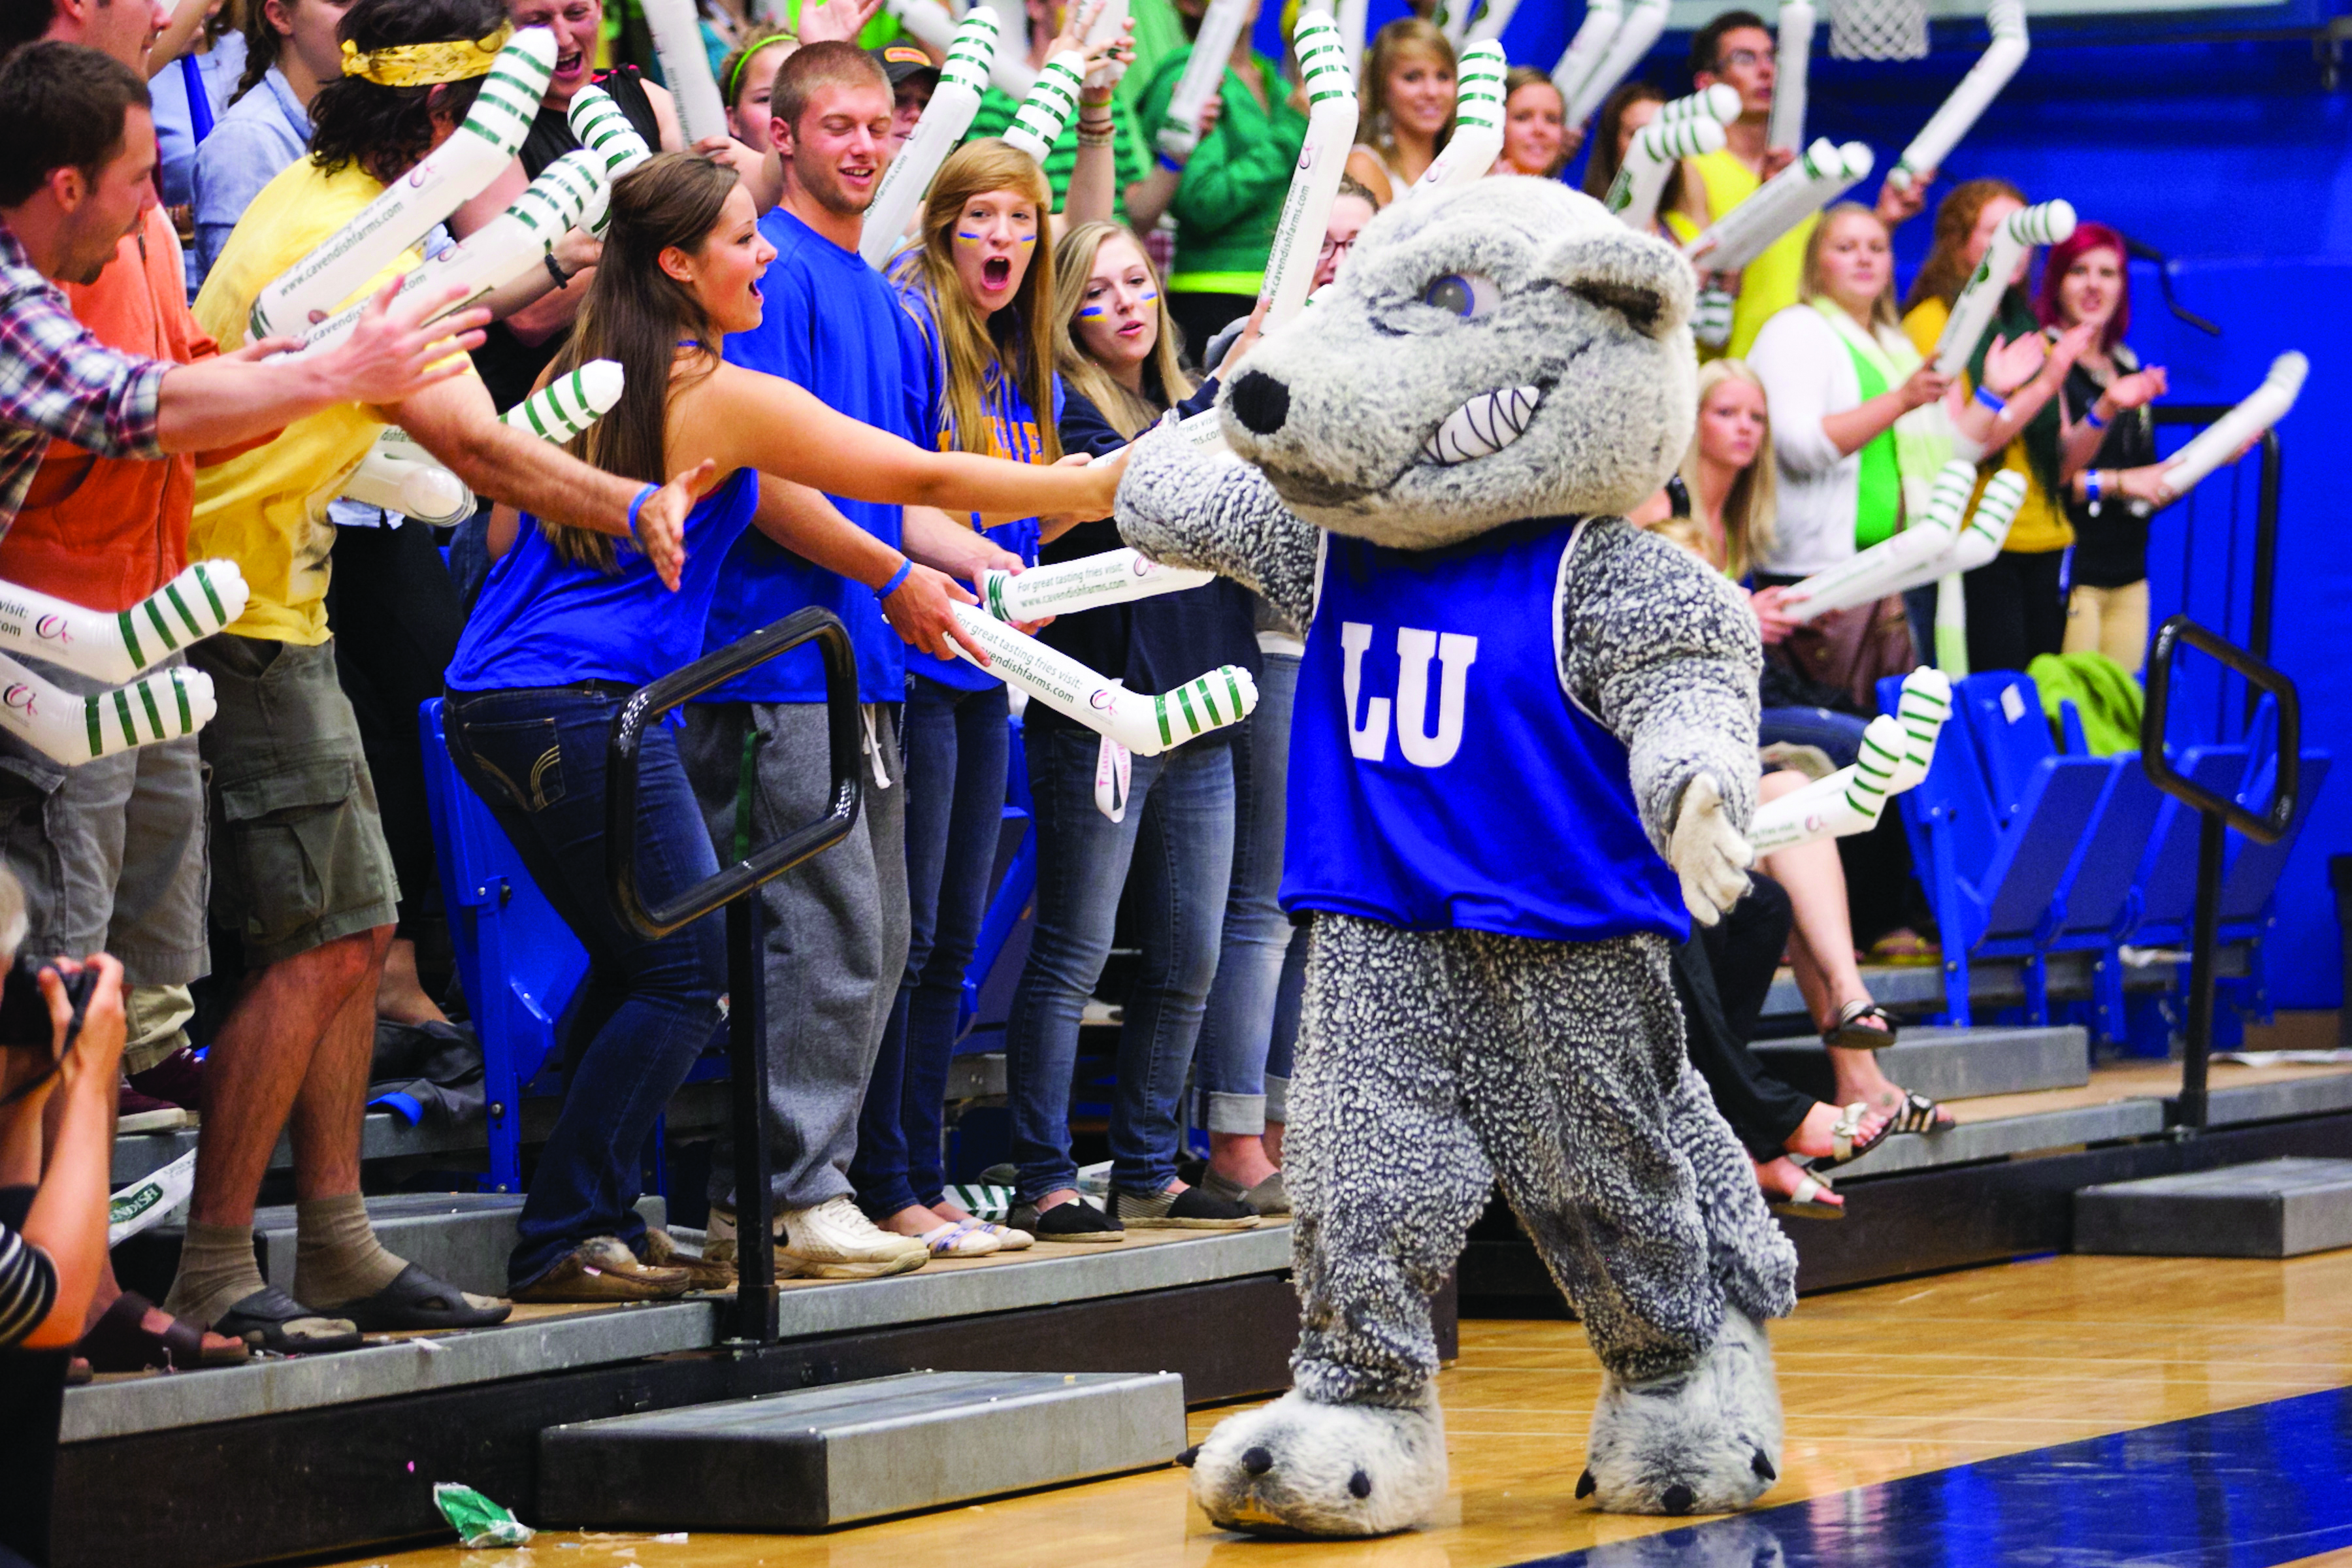 Lakehead's Mascot, Wolfie, cheering with a crowd of students during an Orientation event